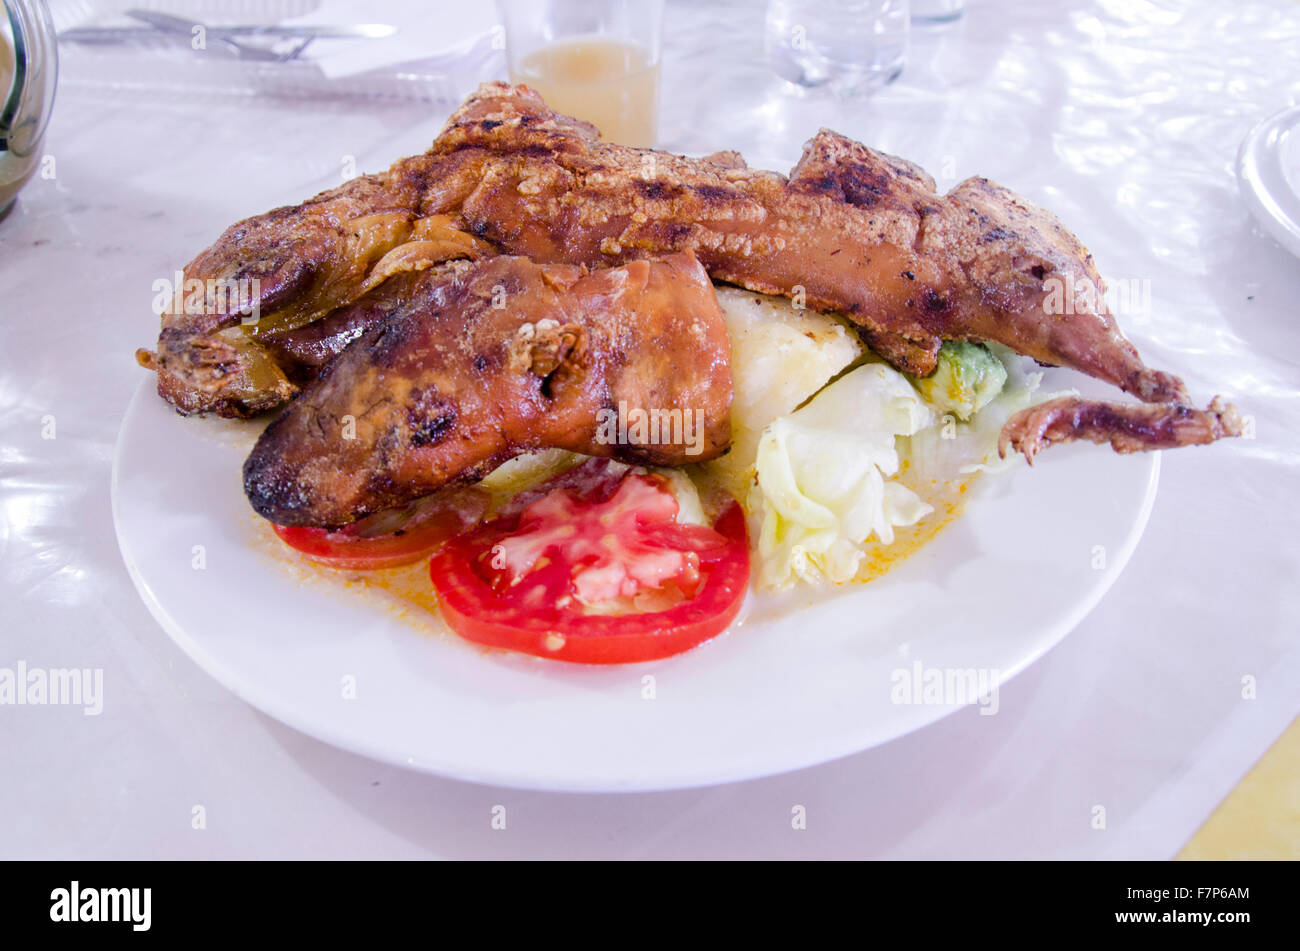 Prepared Guinea Pig served with potatoes and salad Stock Photo